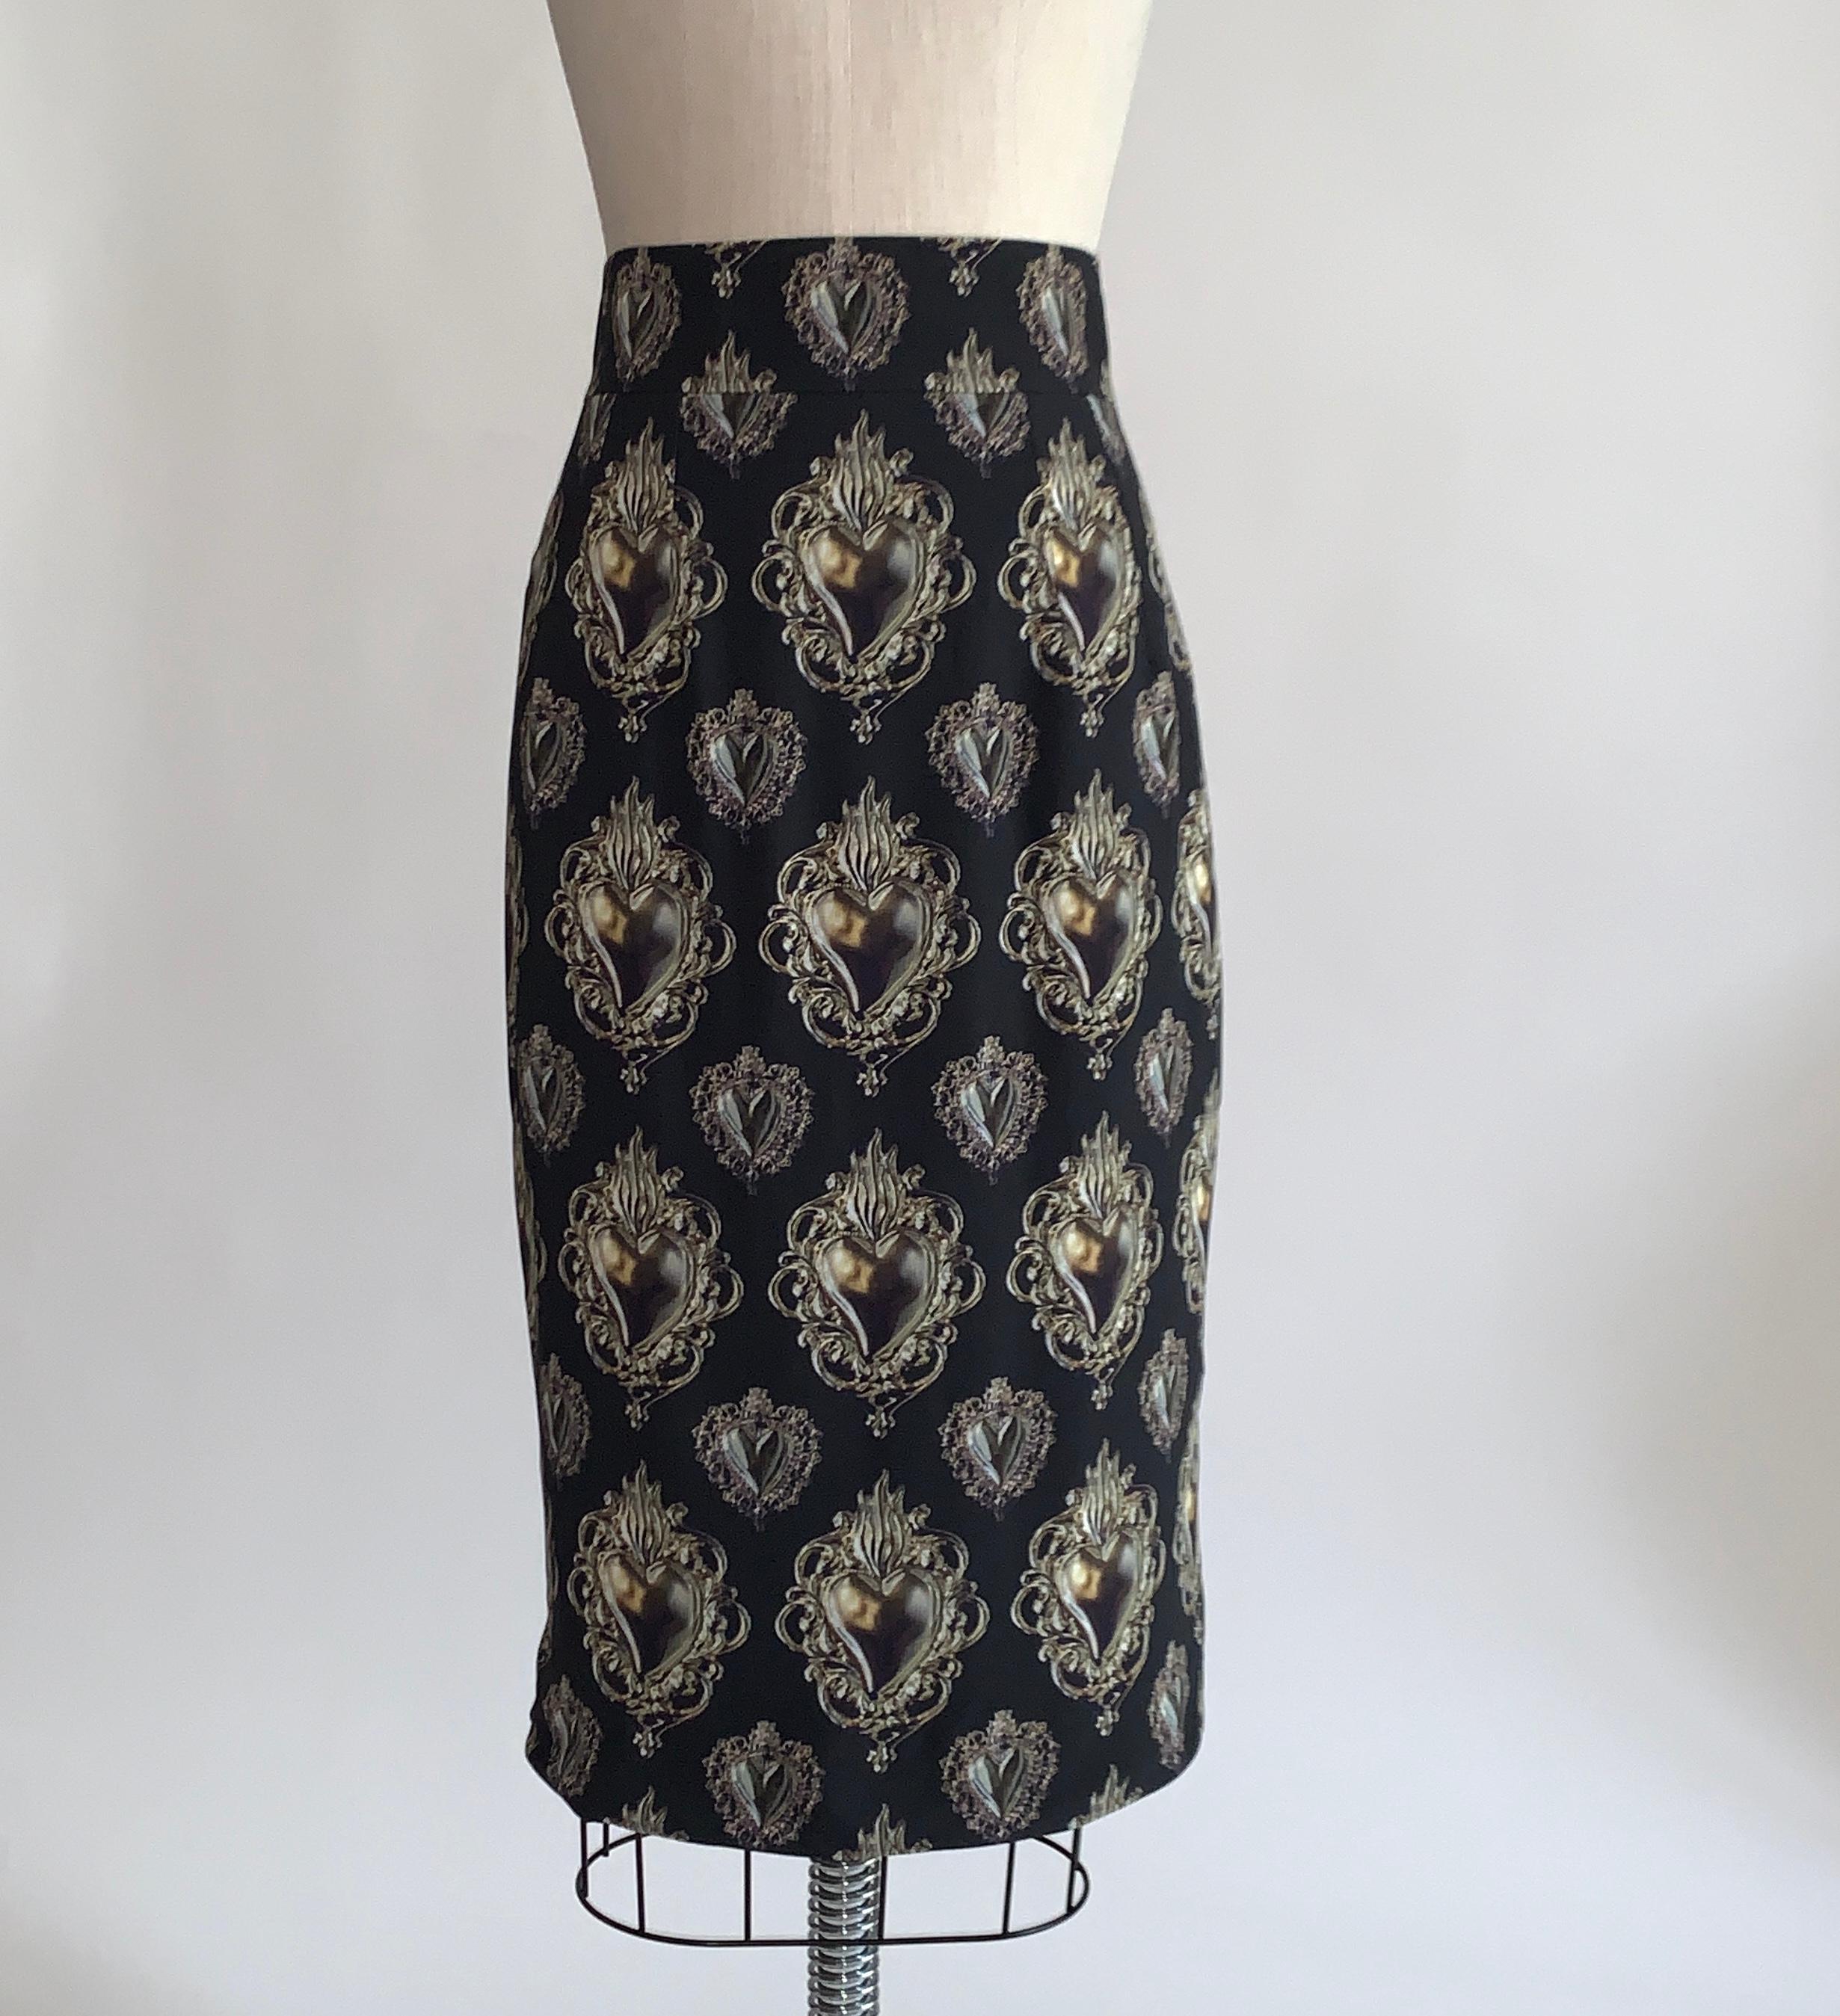 Dolce and Gabbana black and gold sacred heart print straight pencil skirt from the Spring 2015 collection. Slit at back. Back zip and snap closure. This print was seen all over the runway in this collection's show! 

100% rayon/viscose.
Fully lined